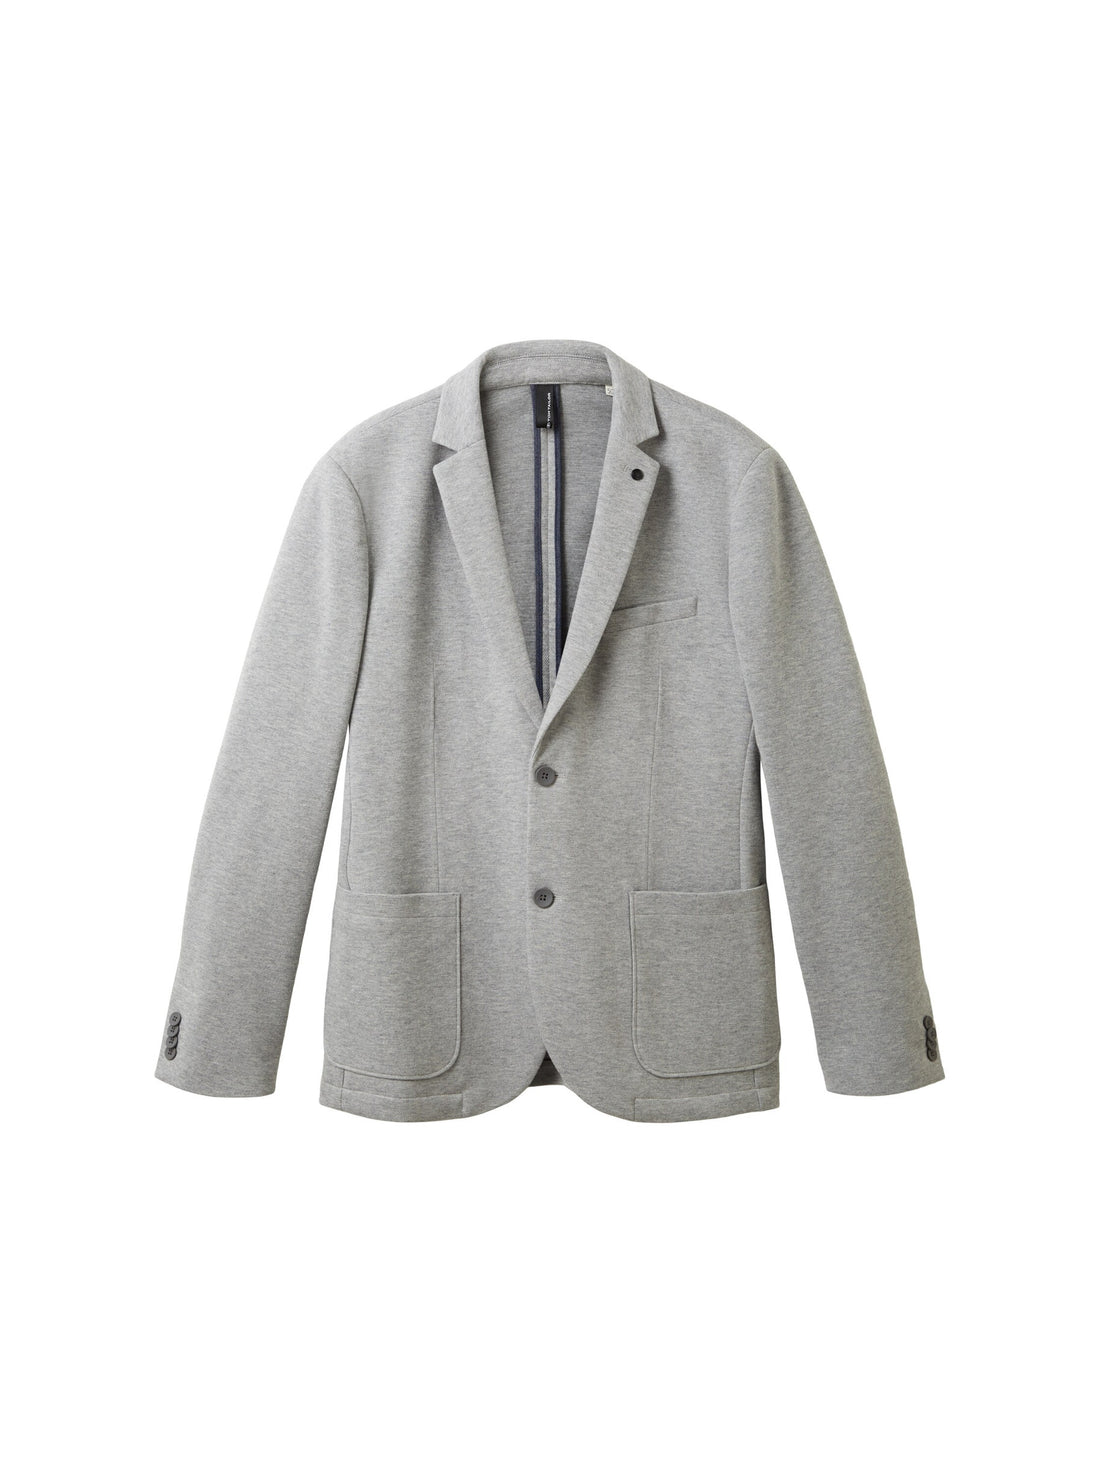 Fitted Classic Blazer_1037796_12035_01